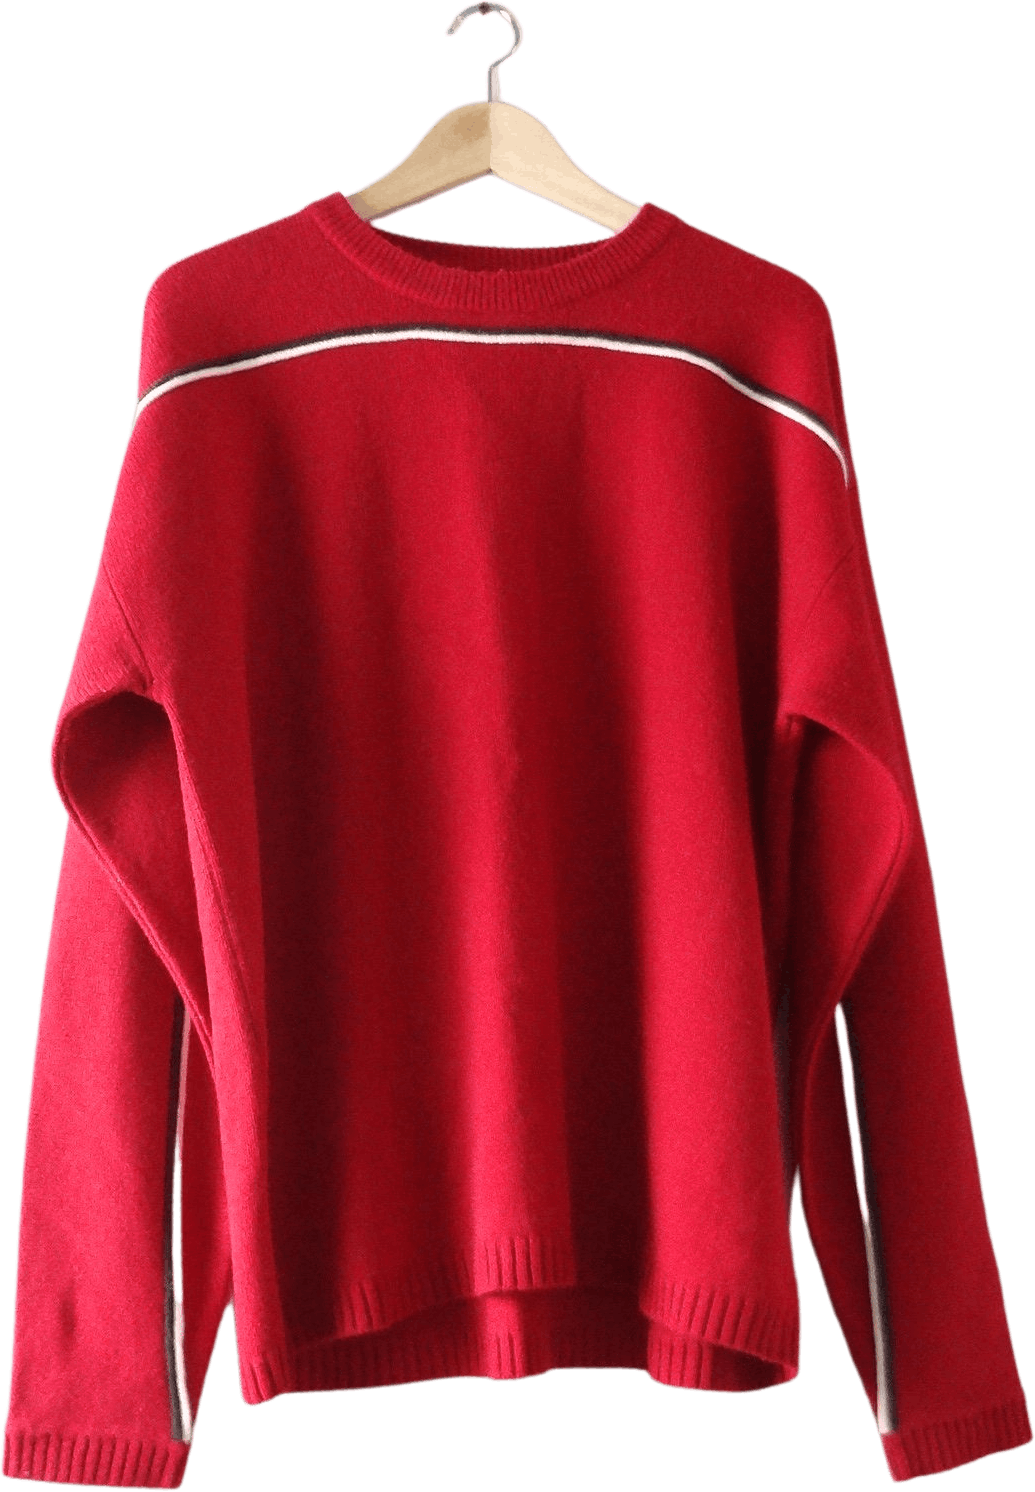 Vintage 80's Red Striped Crewneck Sweater by Xtreme Gear | Shop THRILLING